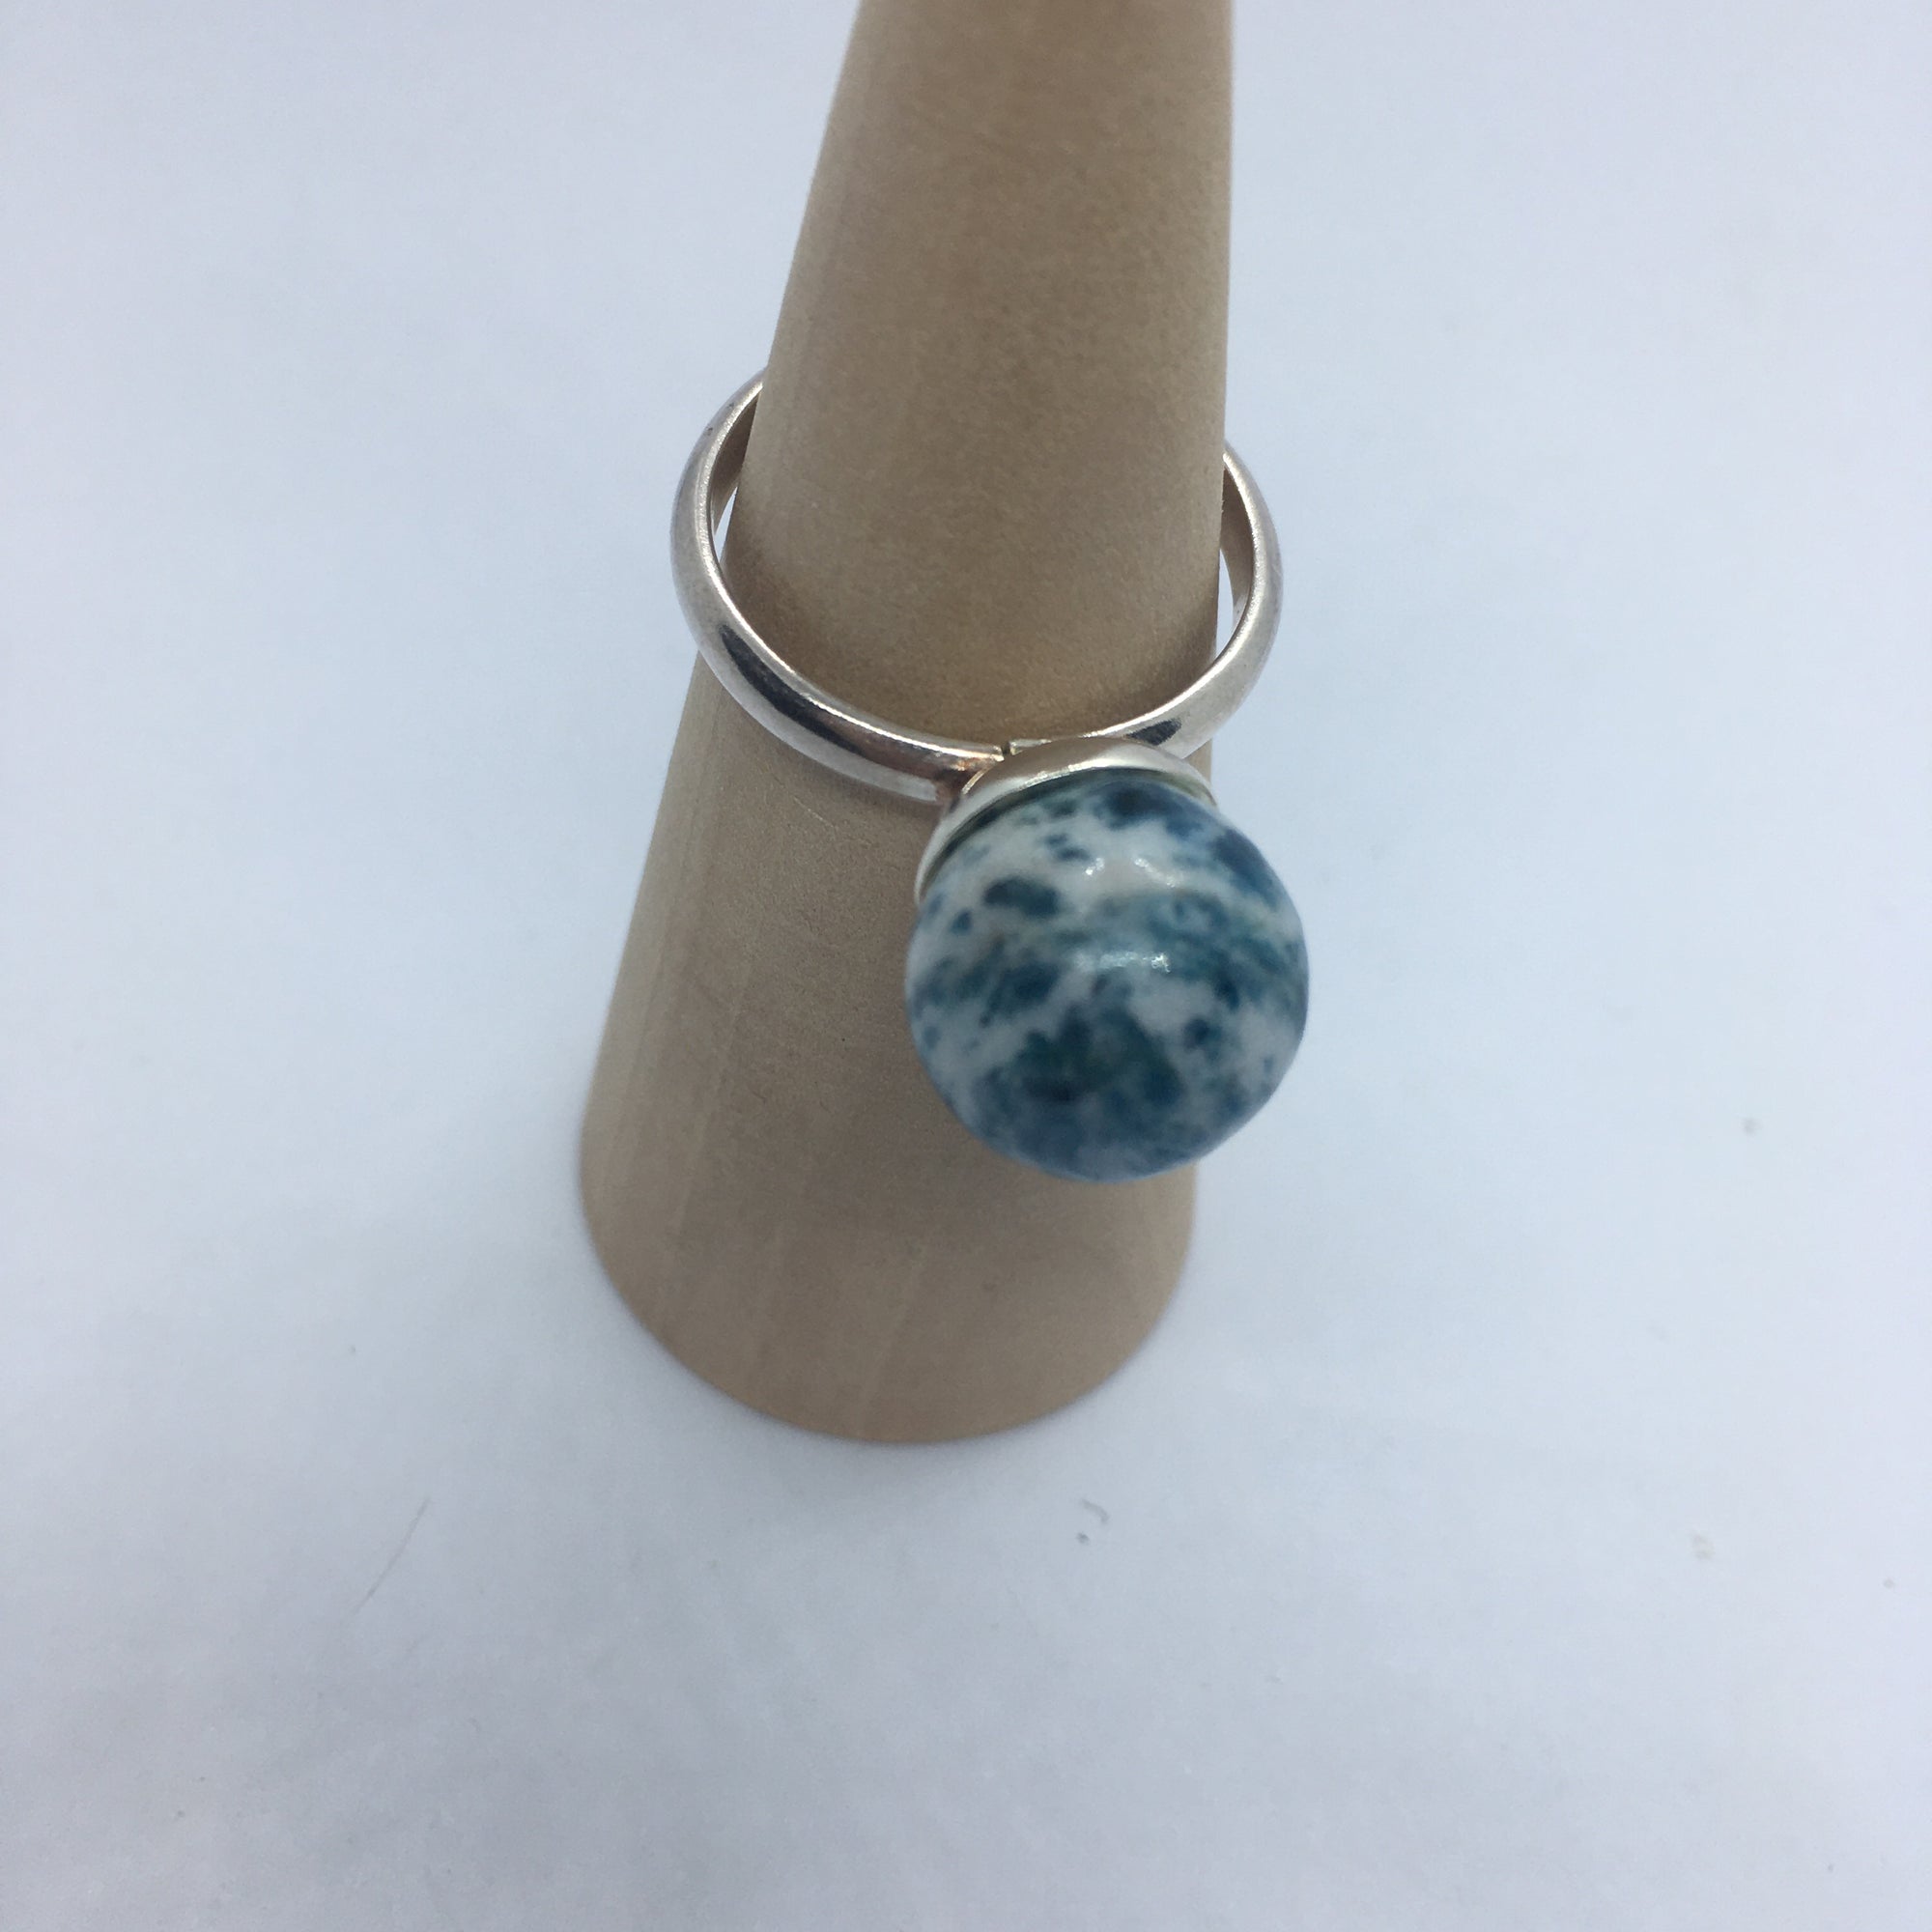 Aotea Sphere and Silver Ring